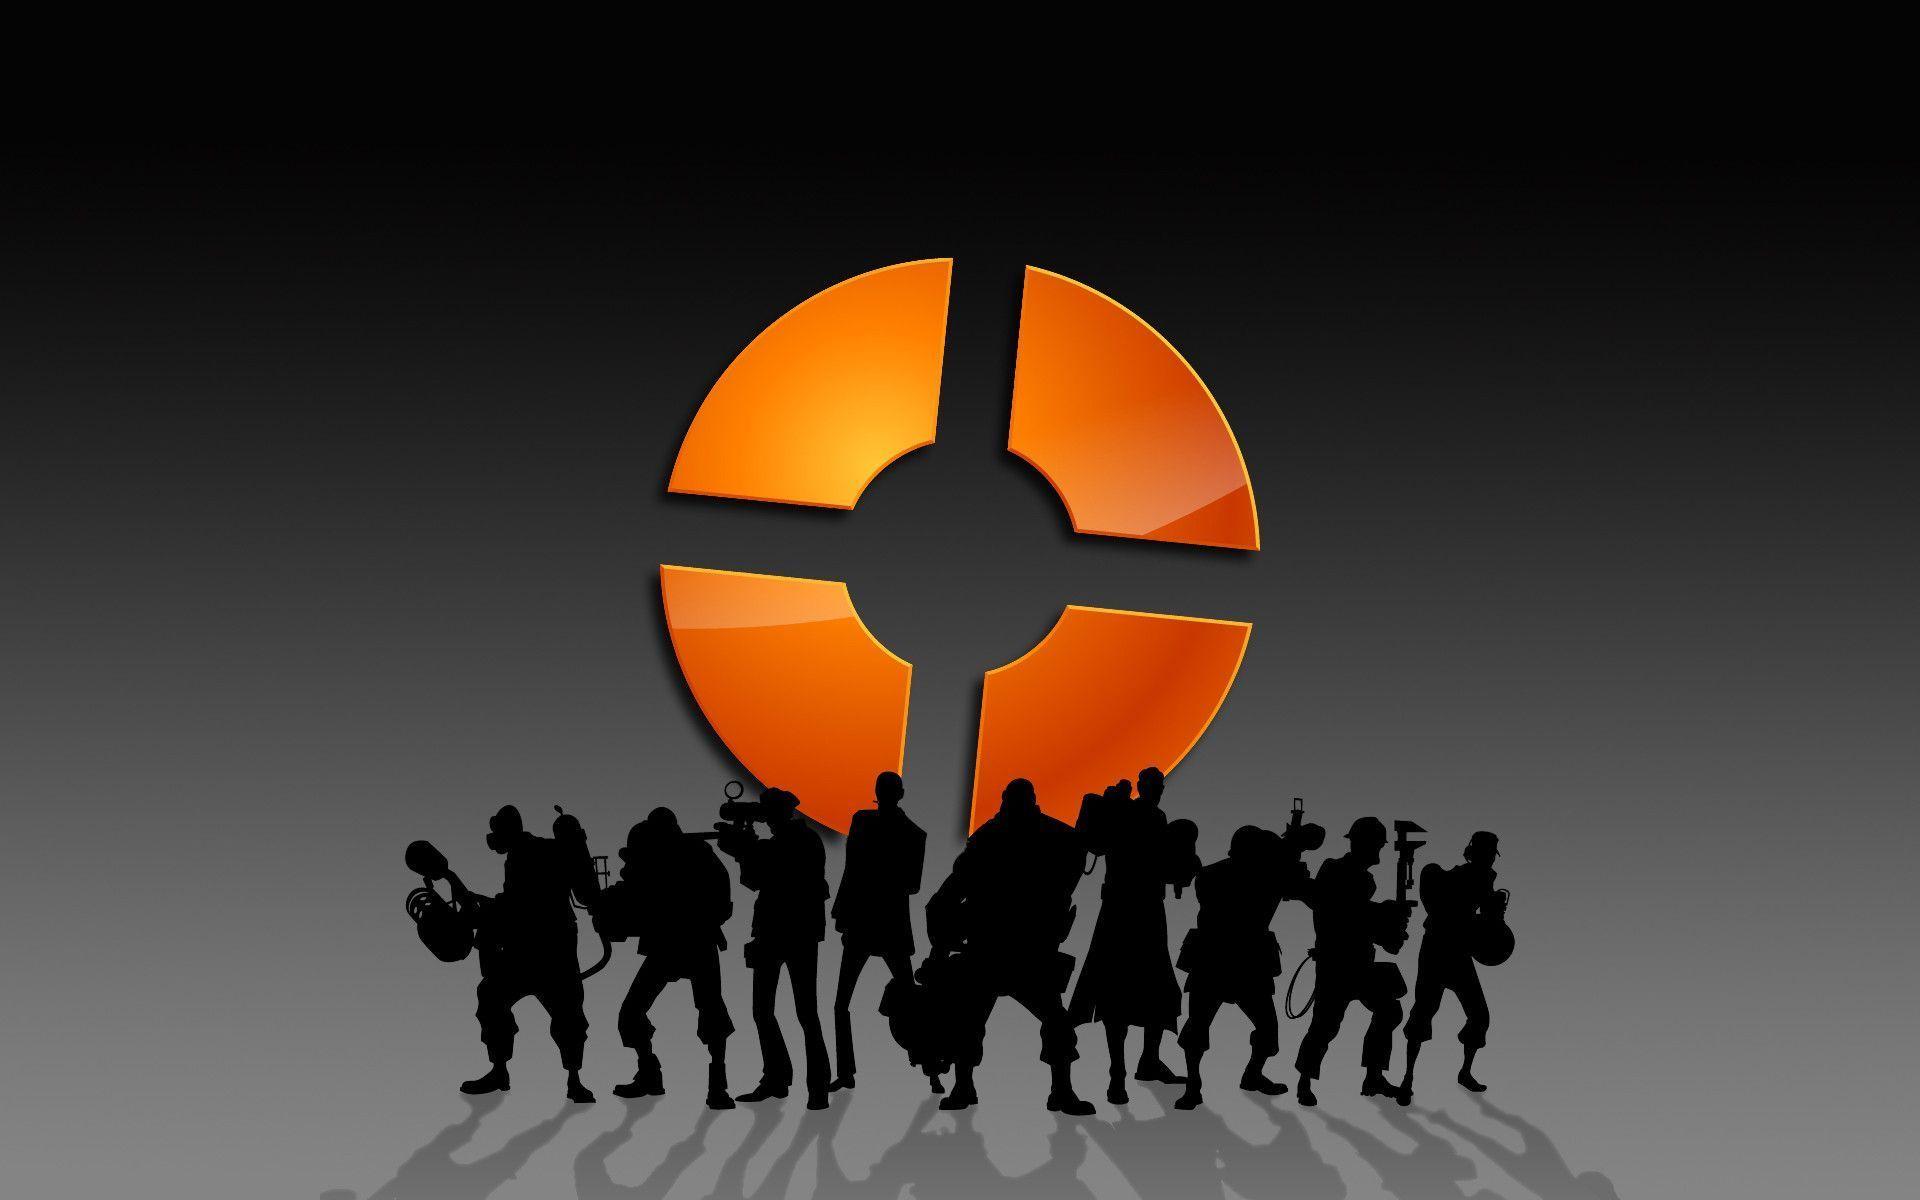 Team Fortress 2 Wallpaper. Team Fortress 2 Background